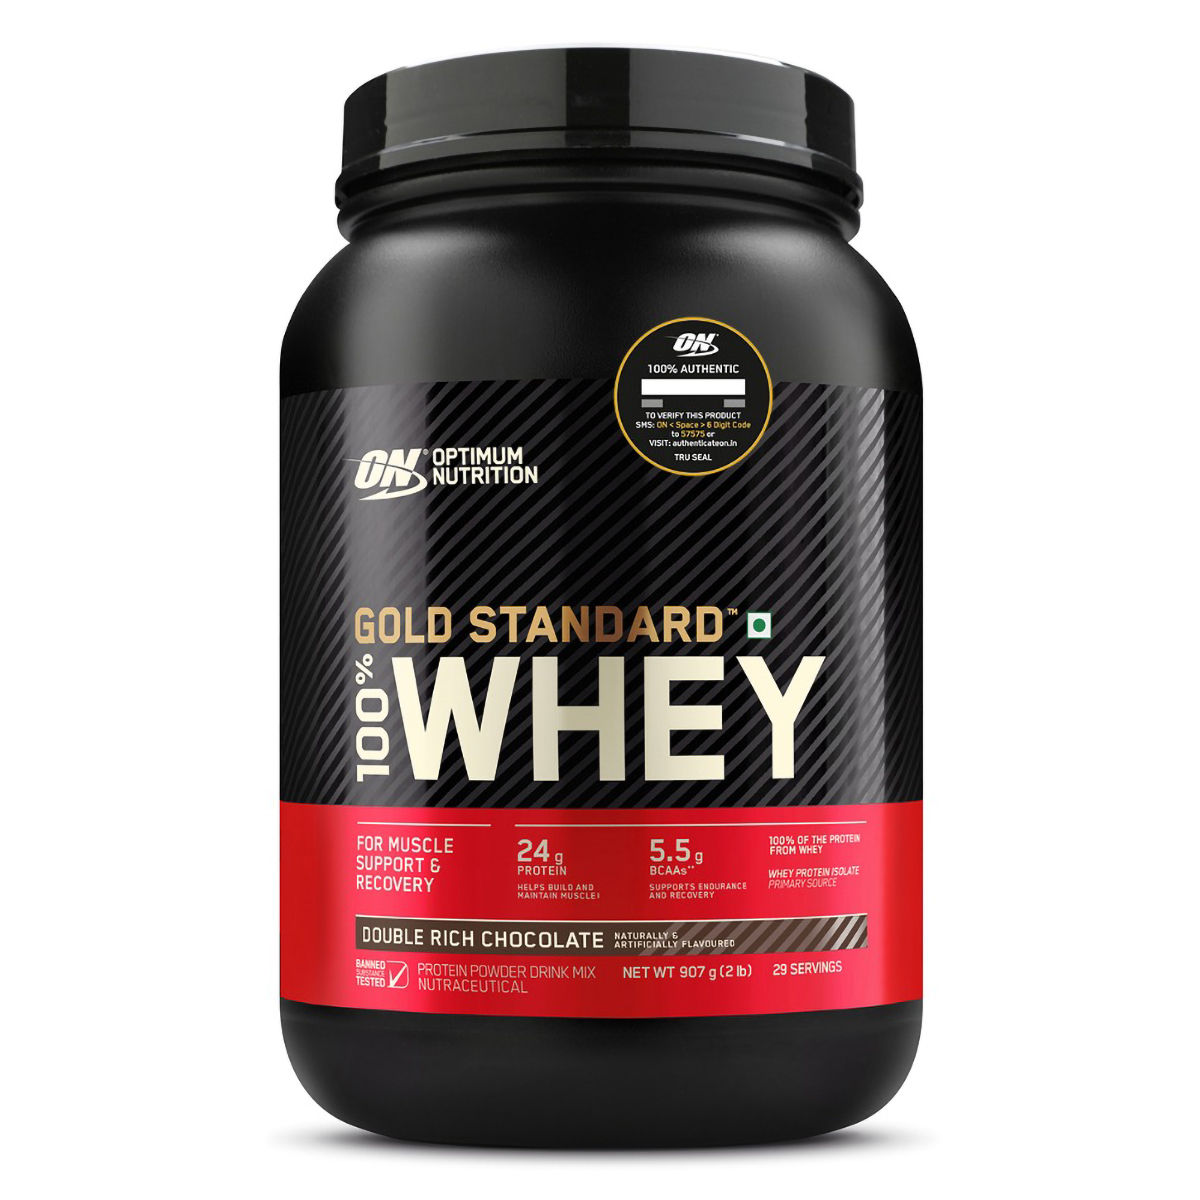 Buy Optimum Nutrition (ON) Gold Standard 100% Whey Protein Double Rich Chocolate Flavour Powder, 2 lb Online